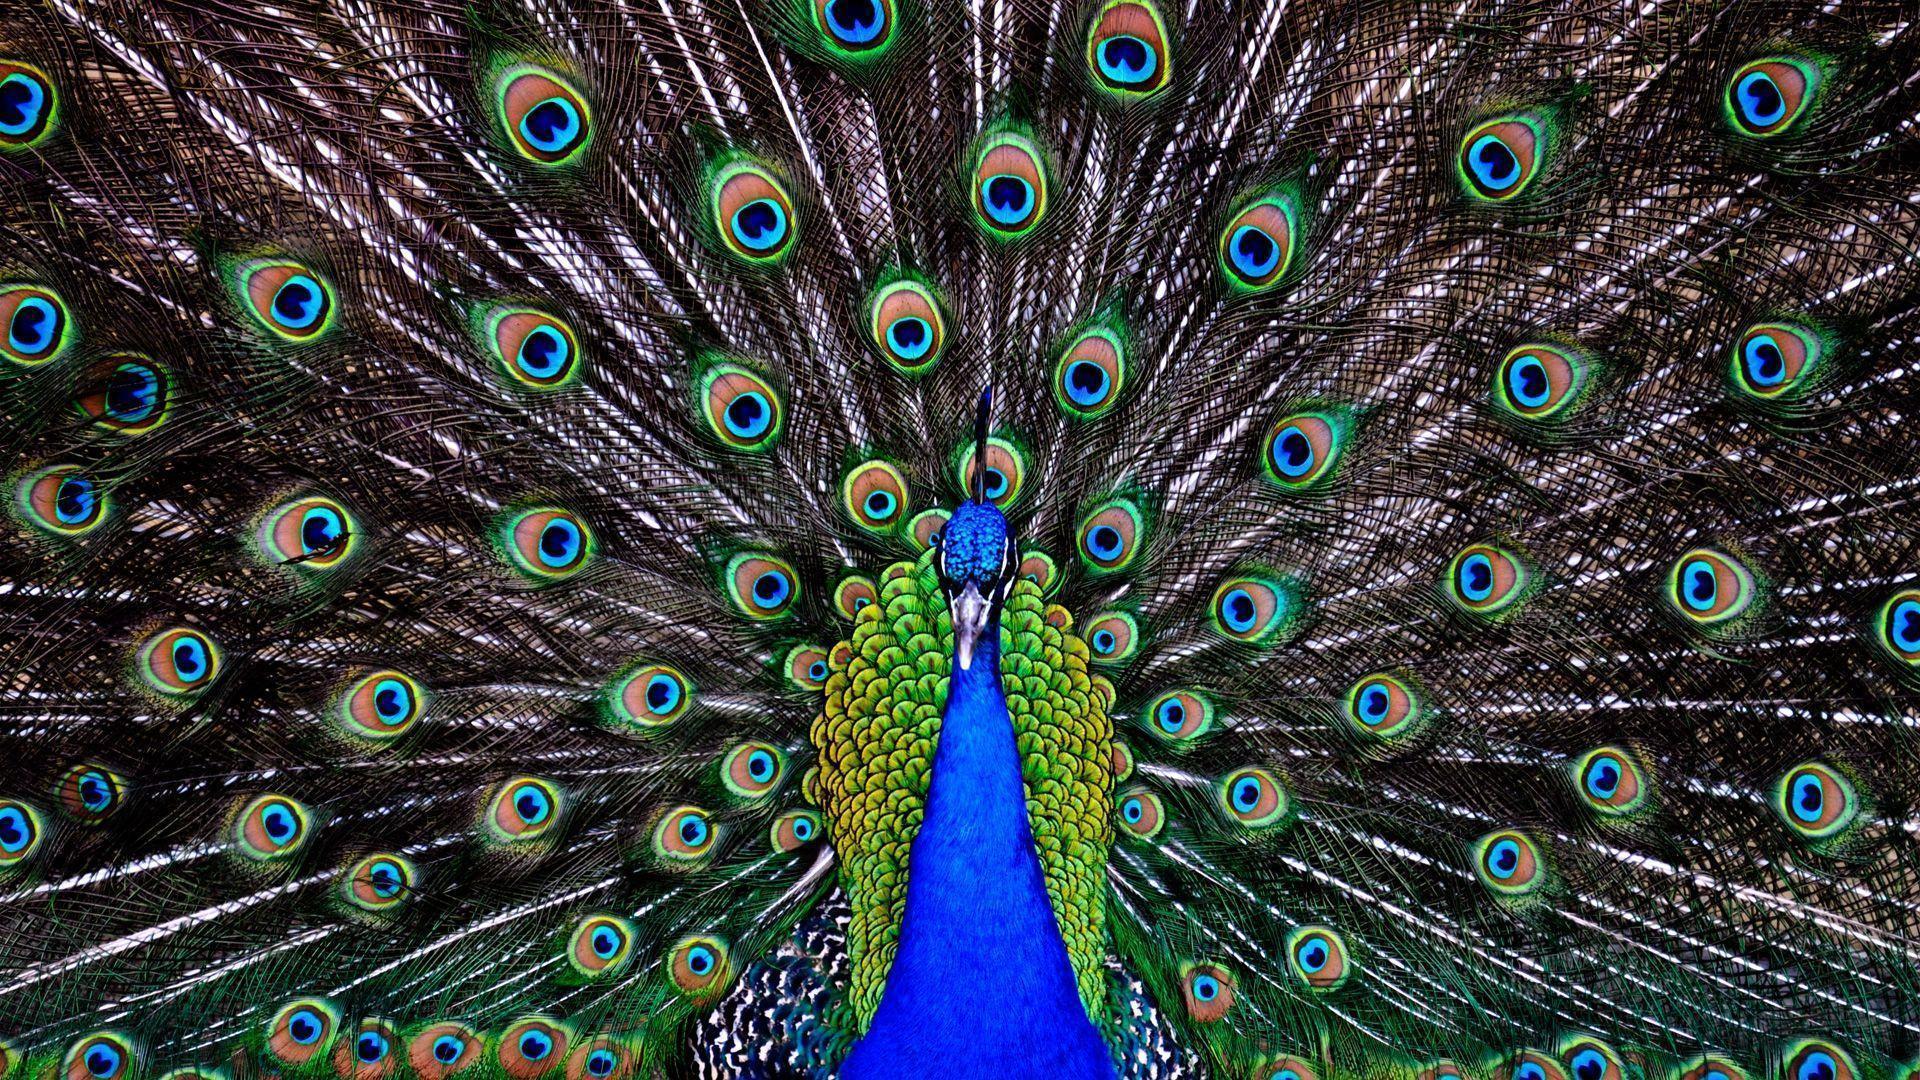 Wallpapers Of Peacock Feathers HD 2016 - Wallpaper Cave